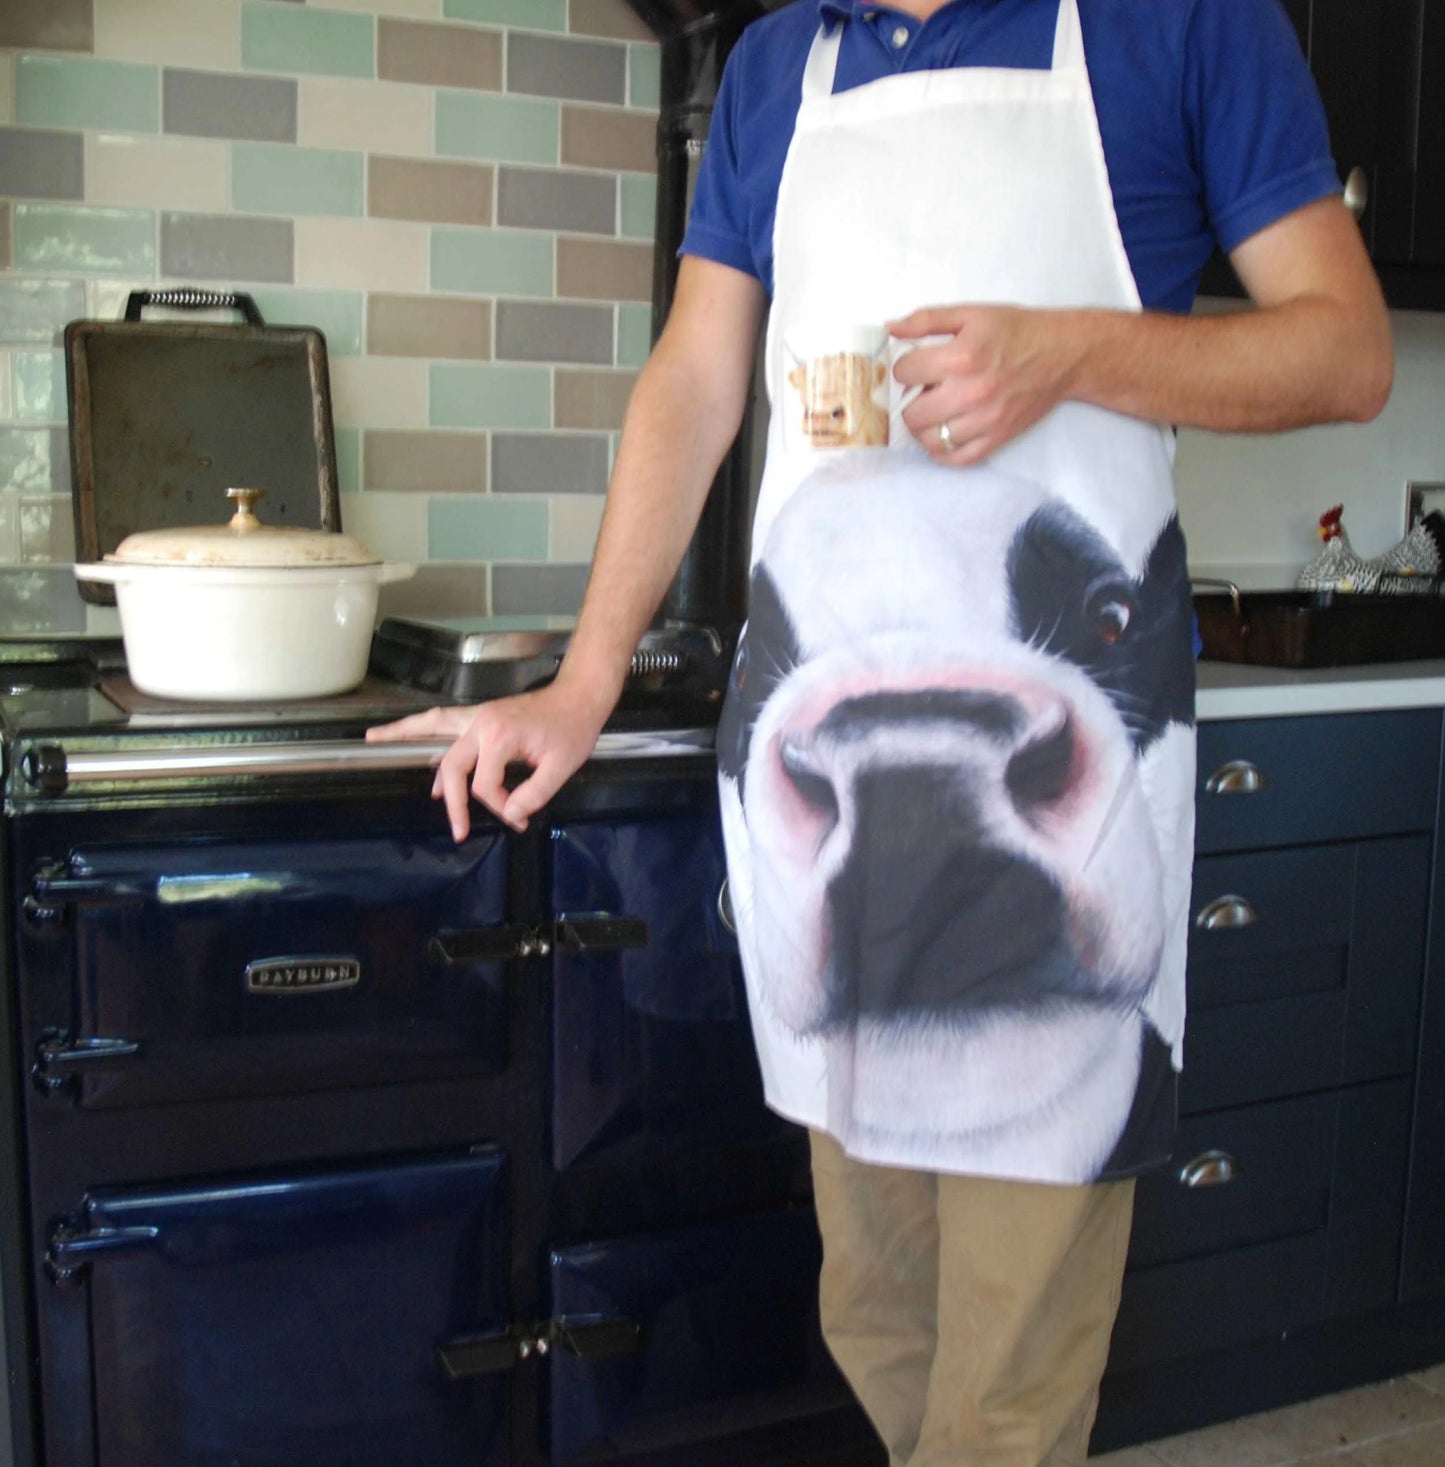 Friesian Cow Apron being worn